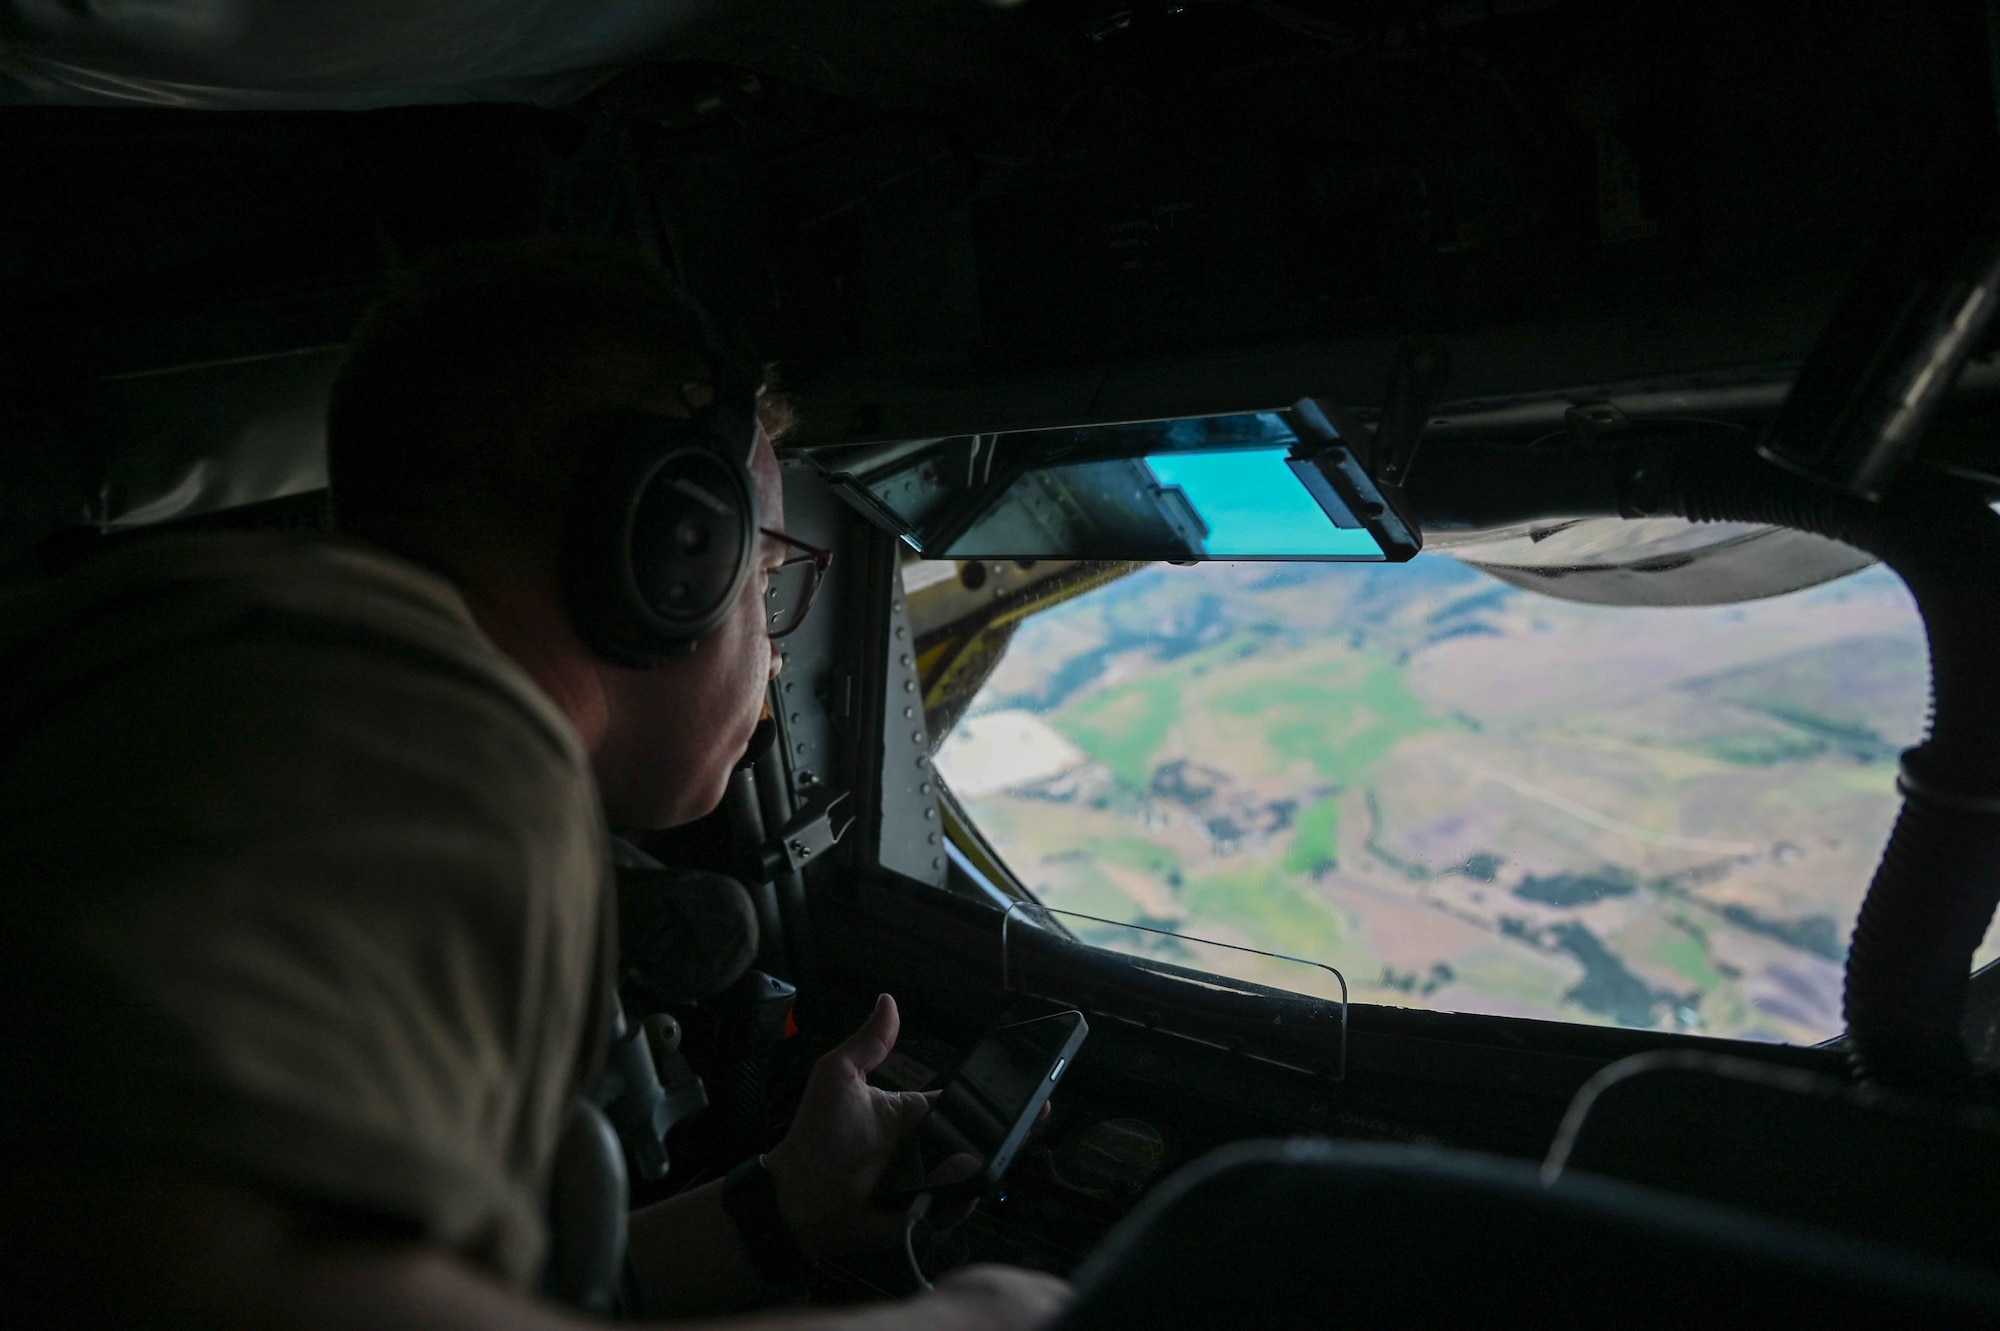 U.S. Air Force Master Sgt. Lucas Treat, 54th Air Refueling Squadron boom instructor, looks out the window at the landscape in the boom pod of the KC-135 Stratotanker during the air refueling centennial flyover, June 27, 2023. Treat is an experienced boom operator with 17 years of service. (U.S. Air Force photo by Airman 1st Class Kari Degraffenreed)